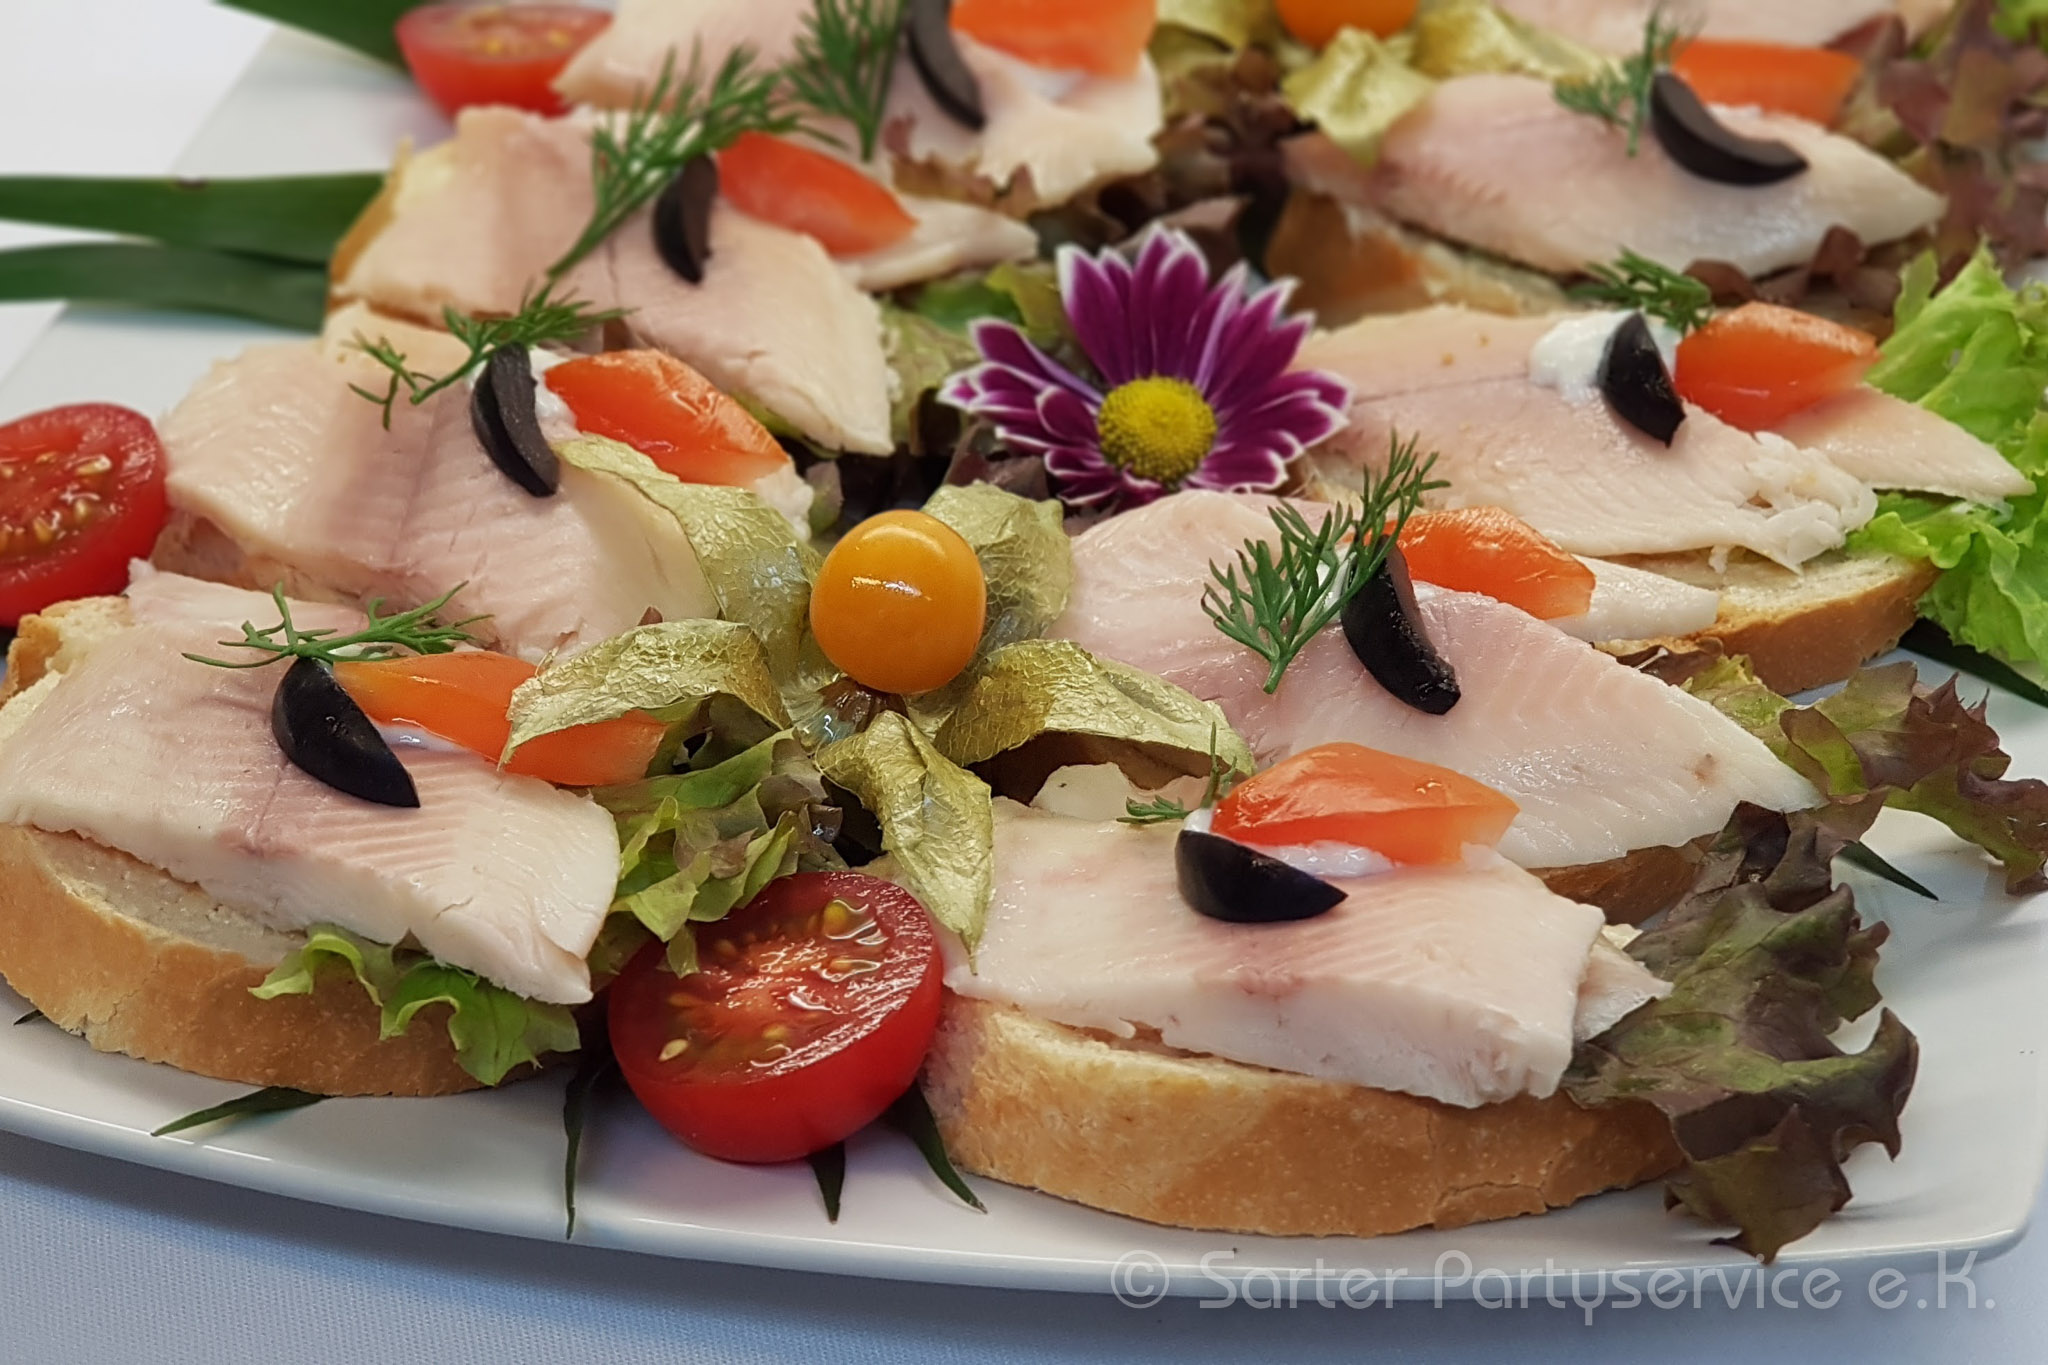 Partyservice-Bonn-Catering-Sarter-093614